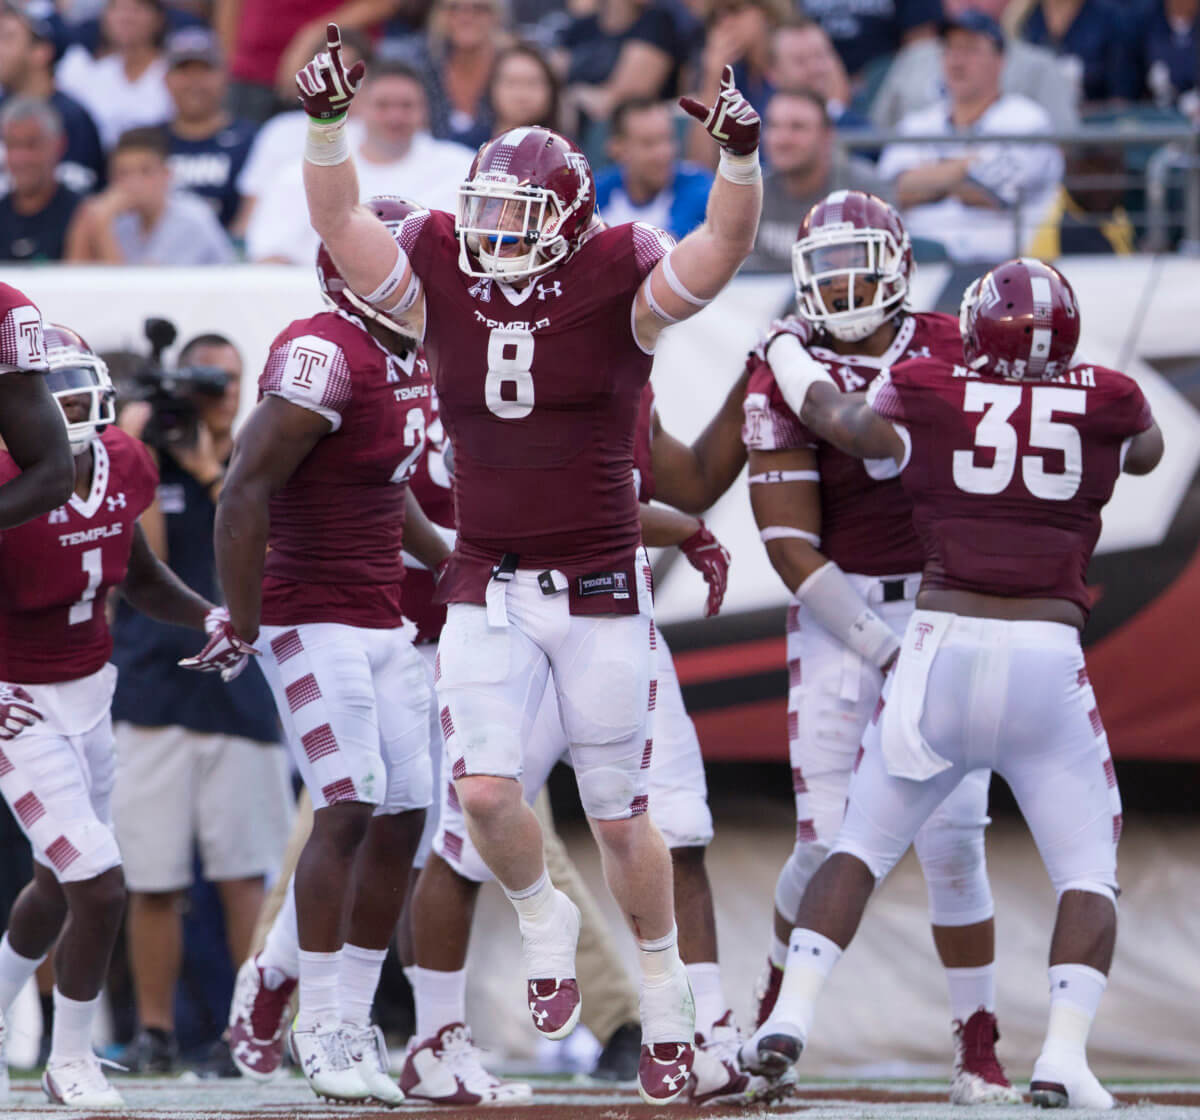 Temple’s Tyler Matakevich handles honor after honor with humility